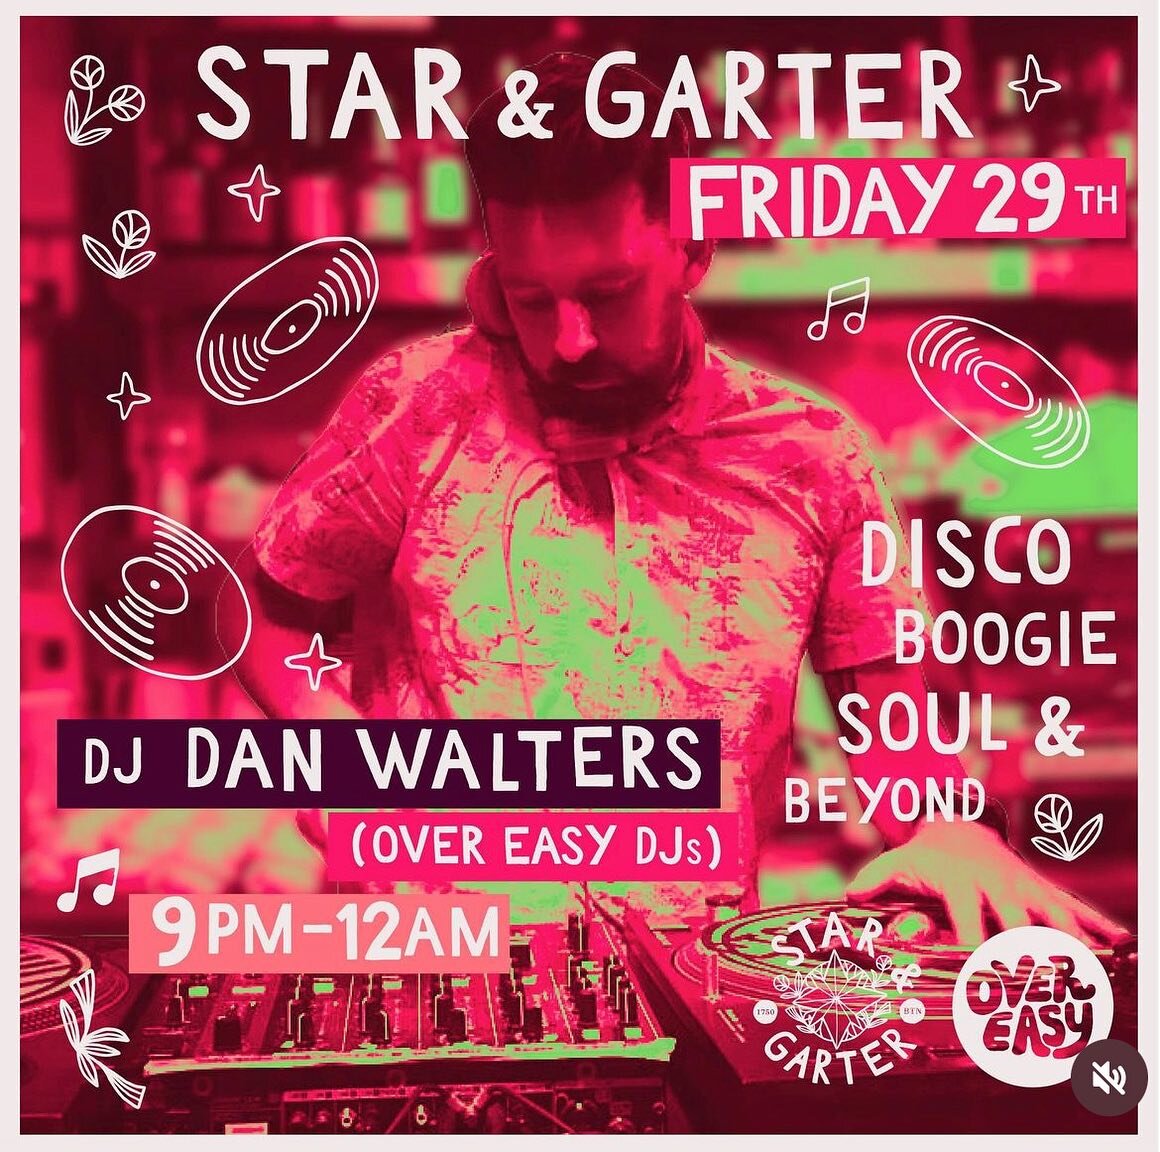 4 DAY WEEKEND, BABY! 💫 @djdanwalters will be kicking off the party this Good Friday with disco, soul, boogie &amp; beyond, with @nicholson.b.d taking over the decks Saturday night to bring you funk, soul, RnB &amp; UKG vibes ✨

As always, @cutiepies